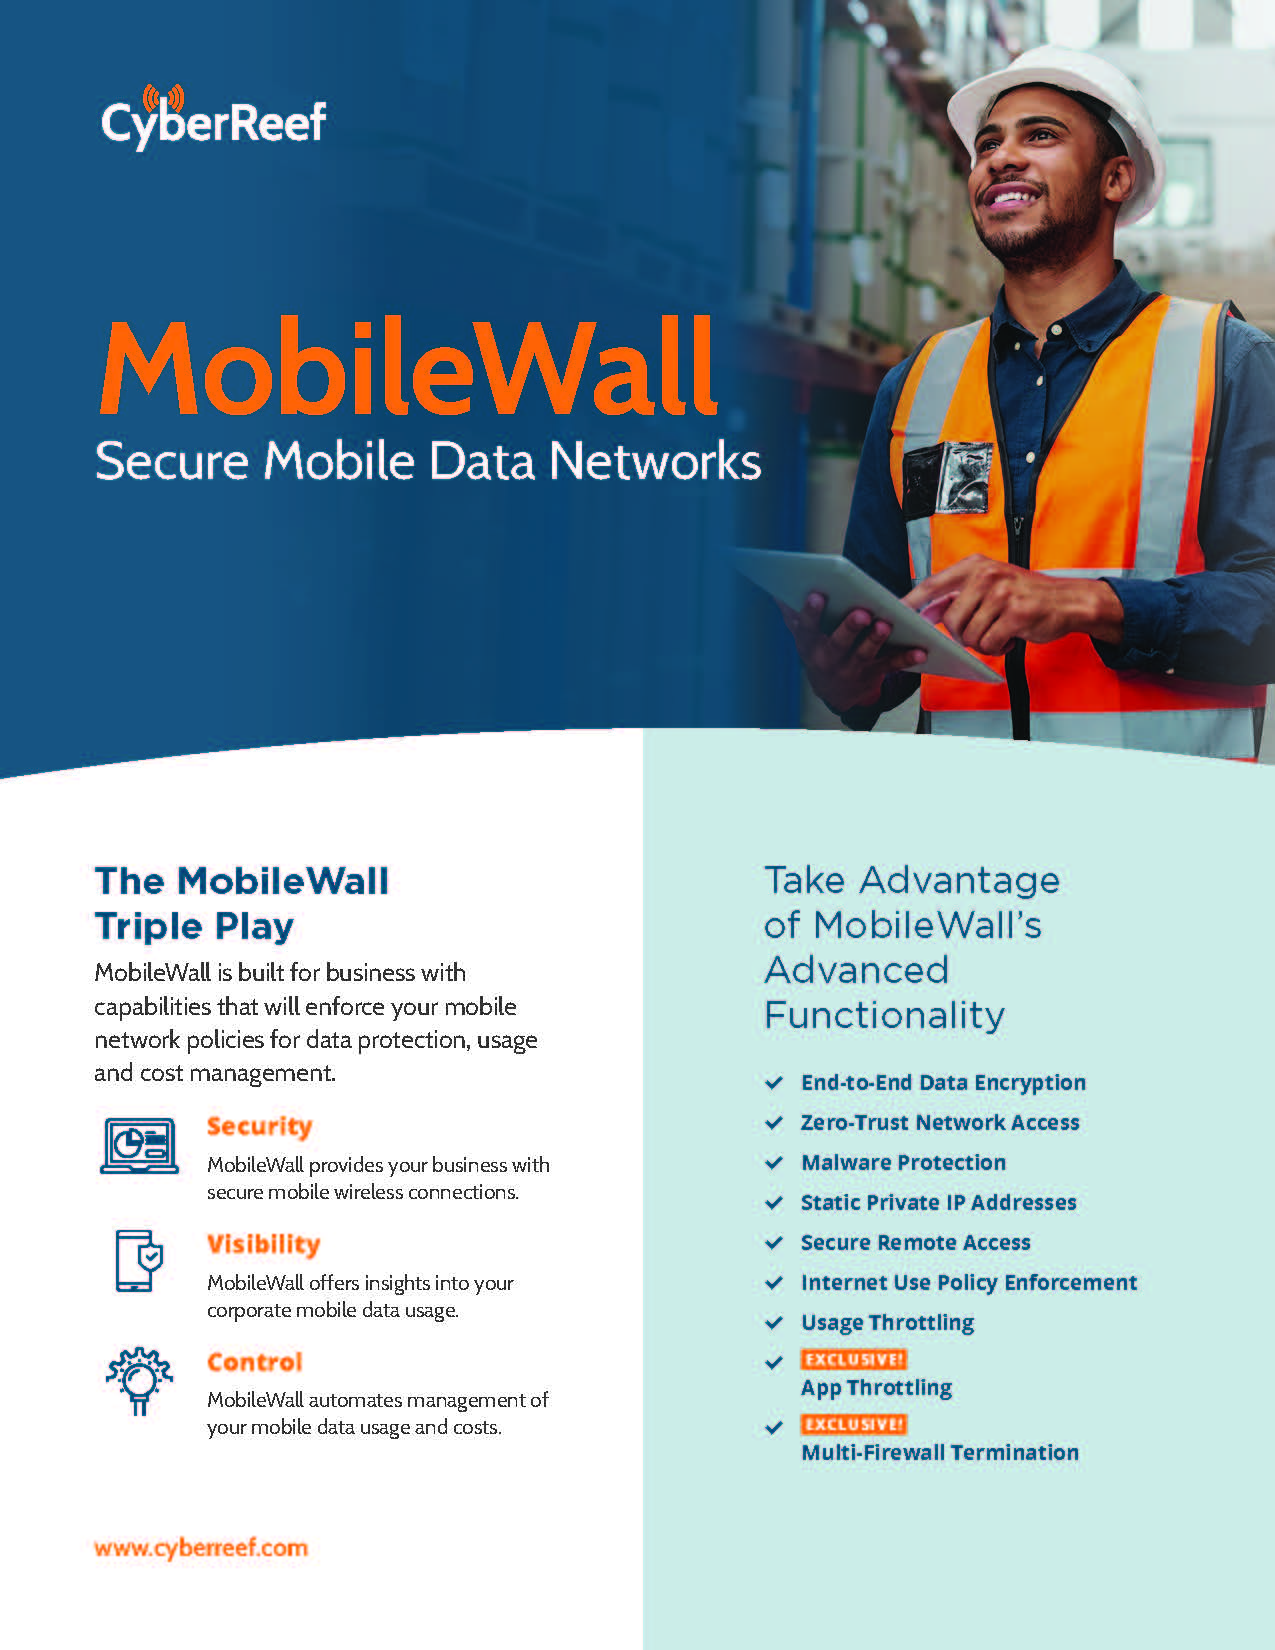 MobileWall Secure Mobile Data Networks